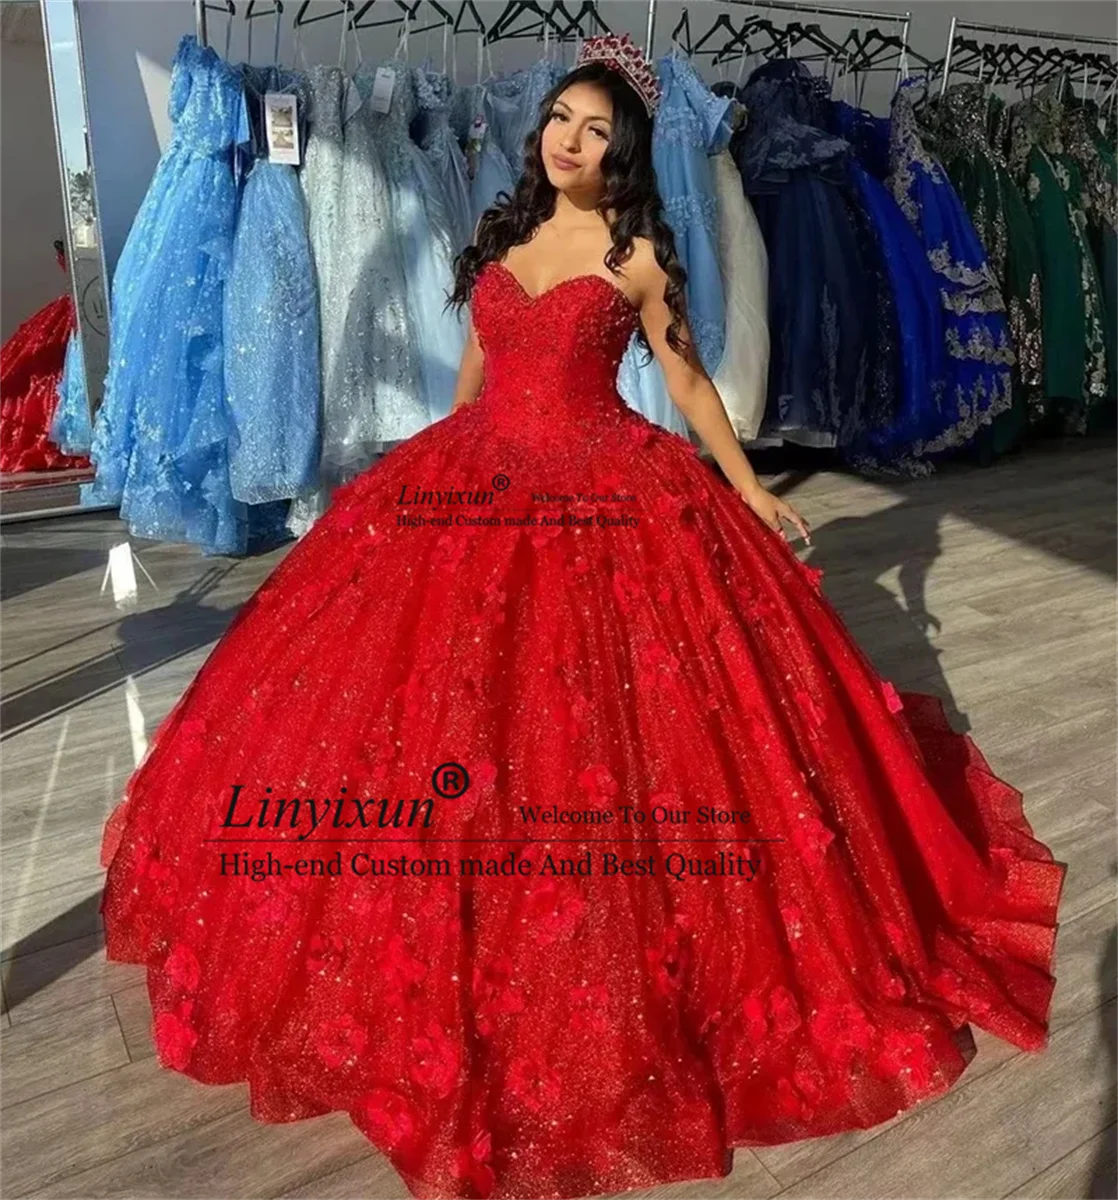 

Sweet Red Sparkly Princess Quinceanera Dresses Off Shoulder Sweetheart Lace Applique Flower 16 Ball Gown Vestidos De 15 Años